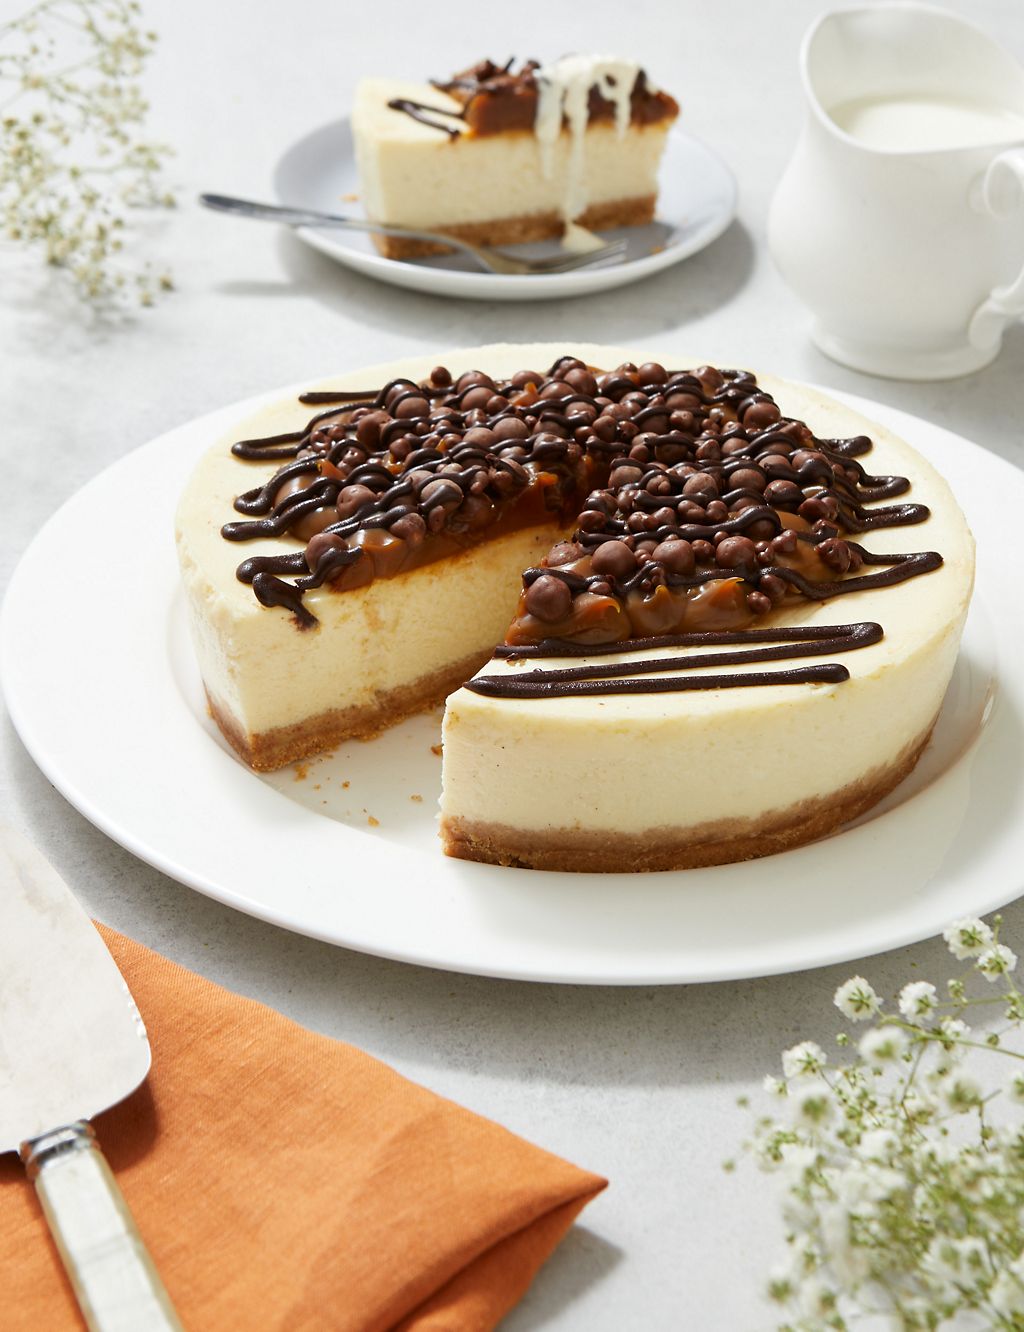 Salted Caramel Topped Cheesecake (Serves 14) - (Last Collection Date 30th September 2020) 3 of 3